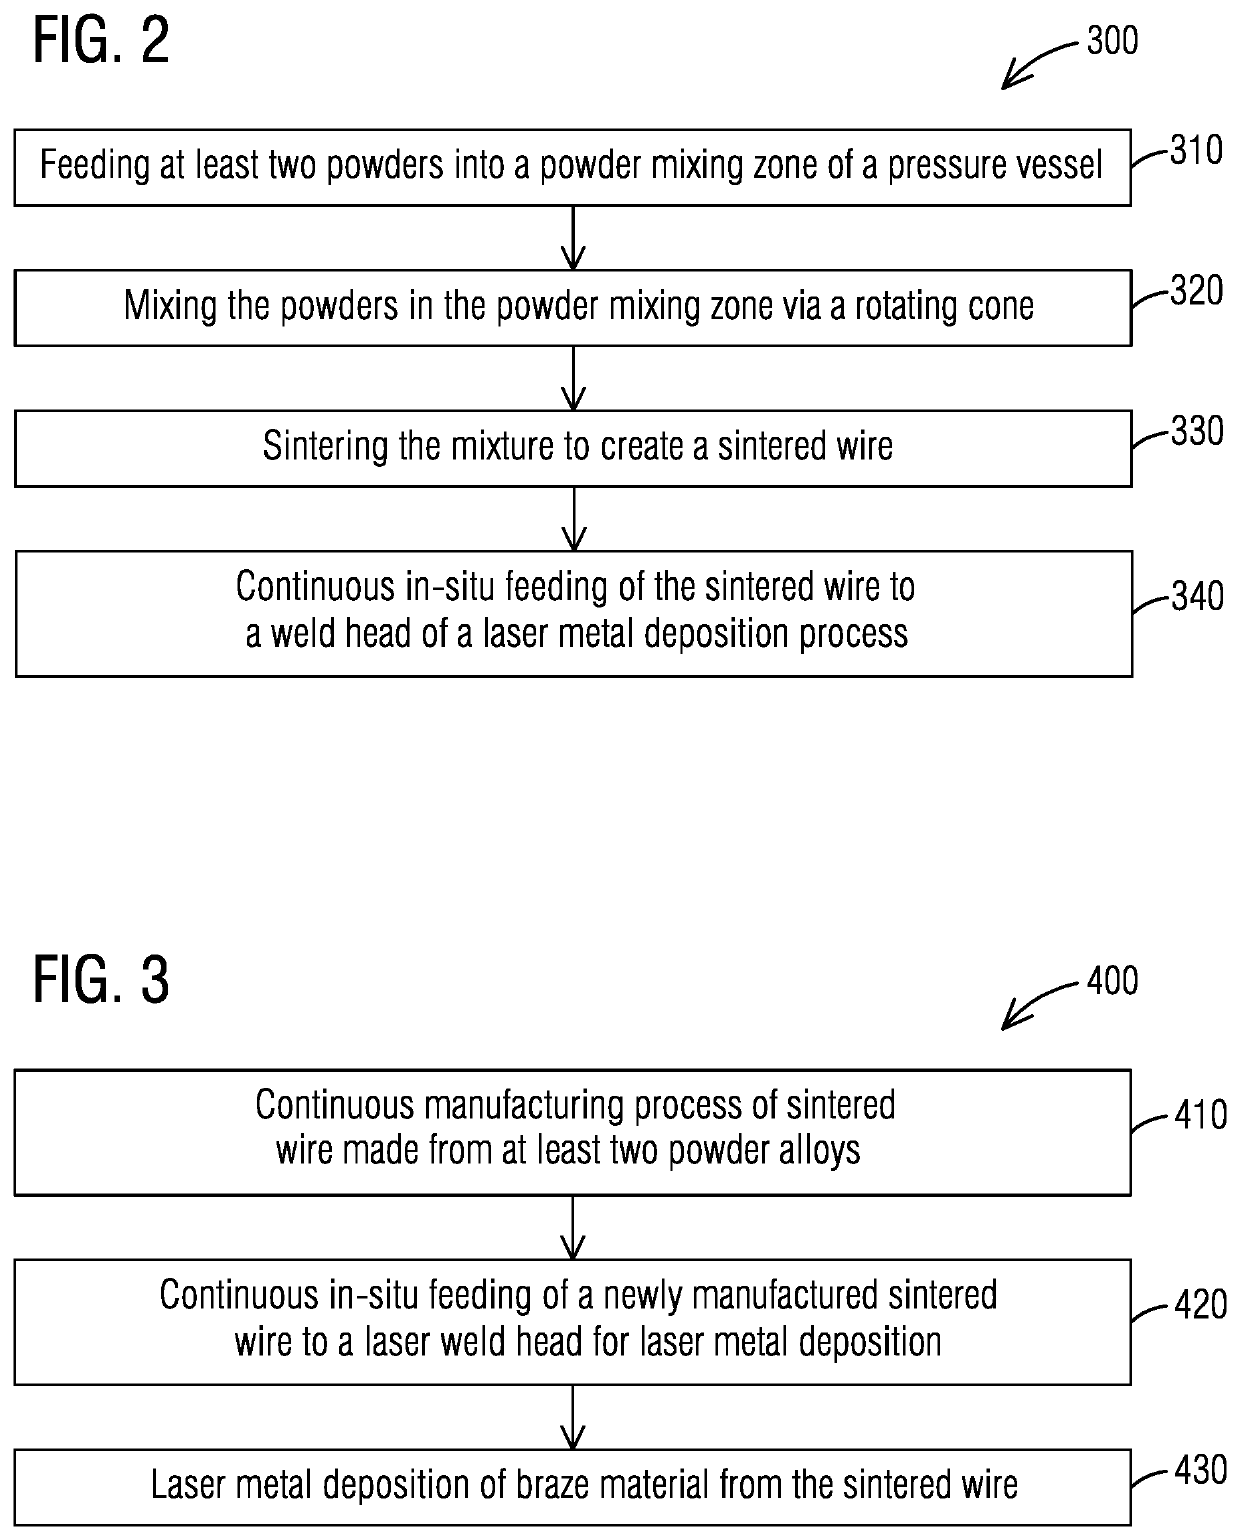 Method and system for additive manufacturing or repair with in-situ manufacturing and feeding of a sintered wire